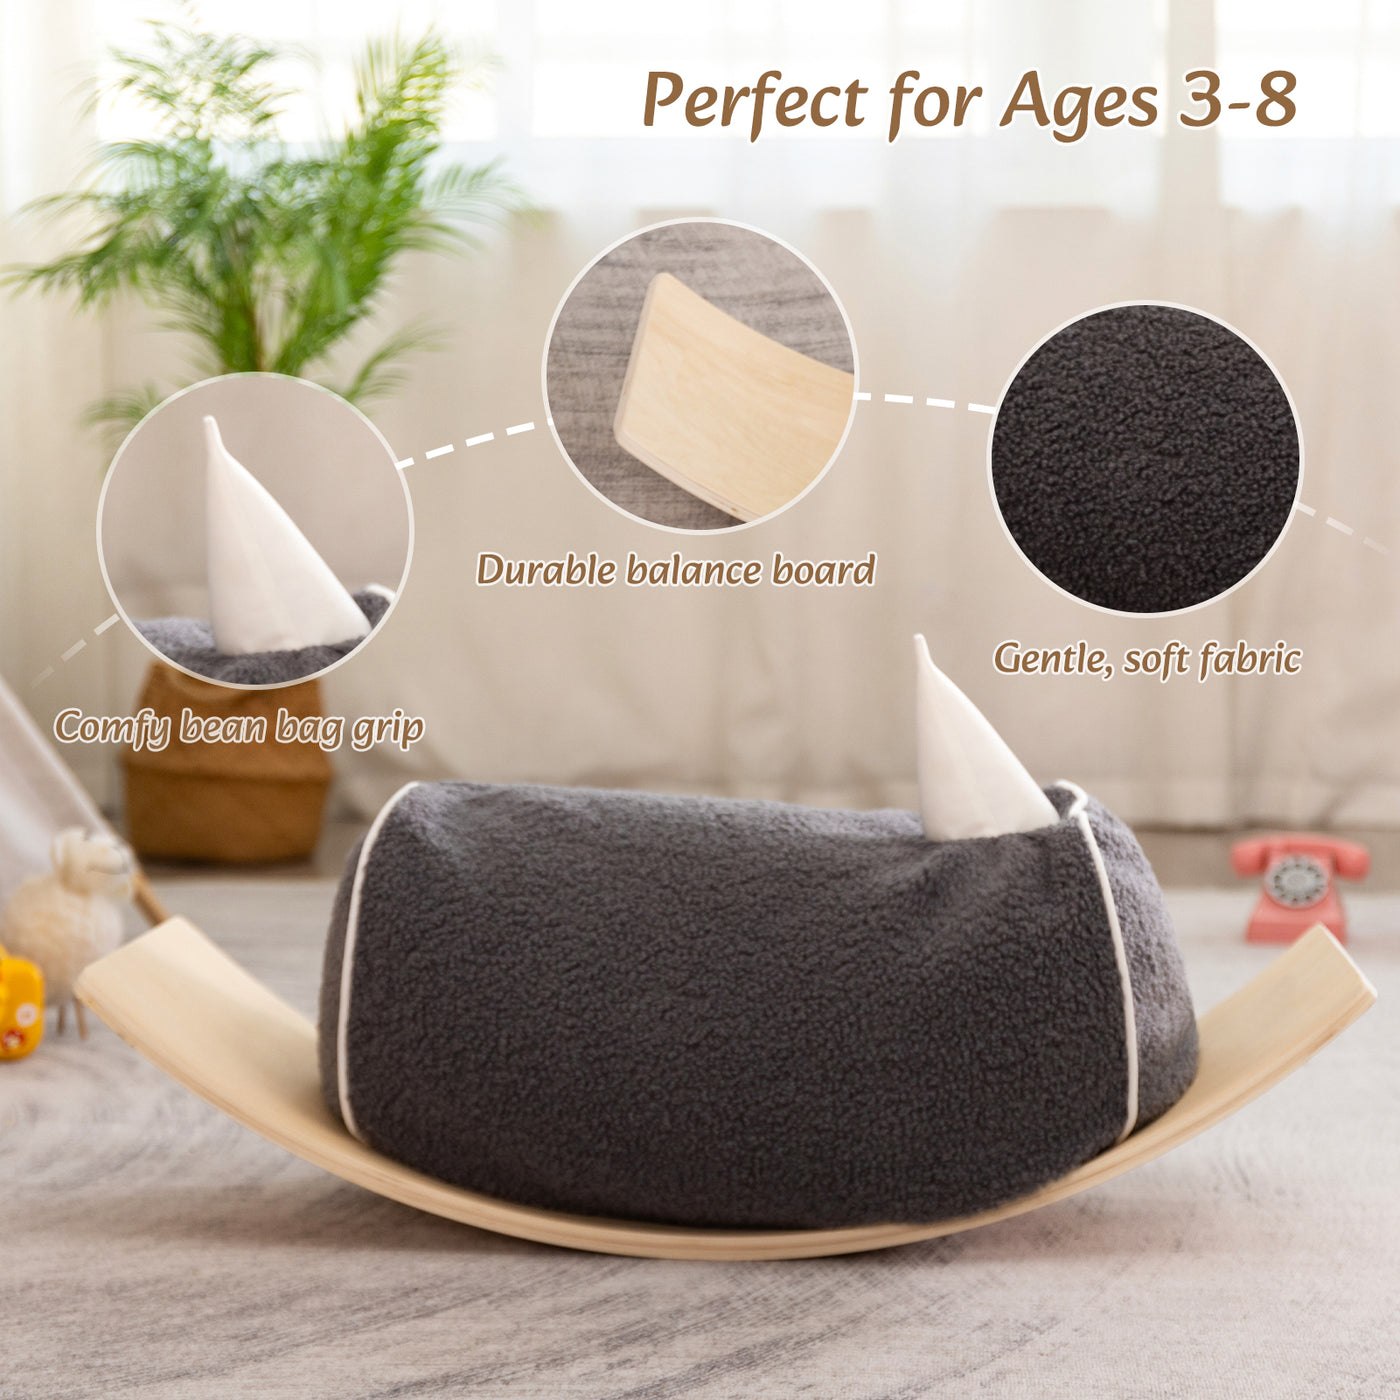 MAXYOYO Kids Bean Bag Chair, Wooden Wobble Balance Board with Bean Bag Chair for Kids Toddlers, Grey